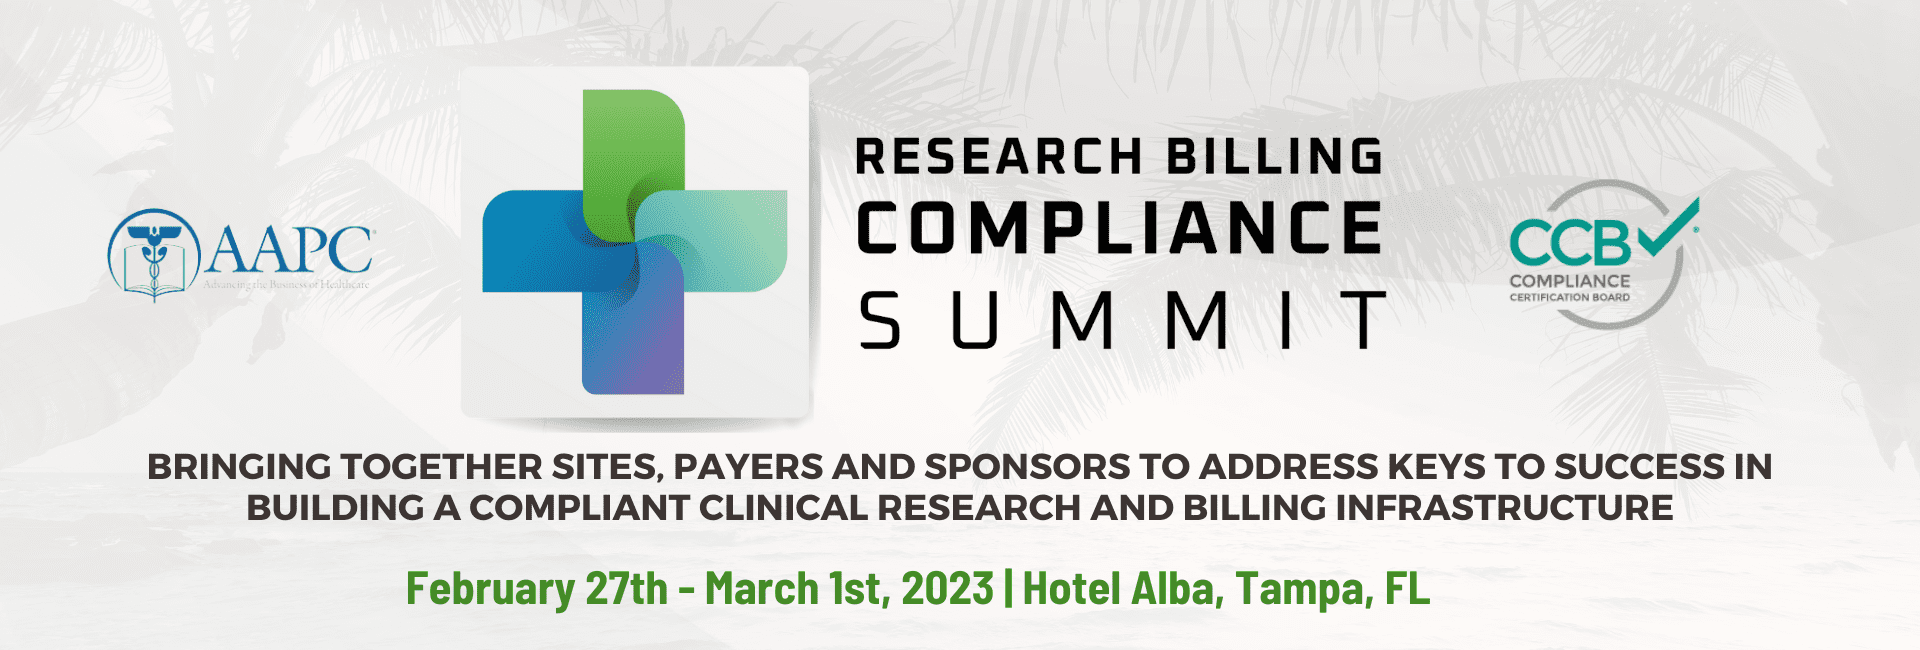 Banner for Research Billing Compliance Summit, February 27th - March 1st 2023 Hotel Alba Tampa Florida